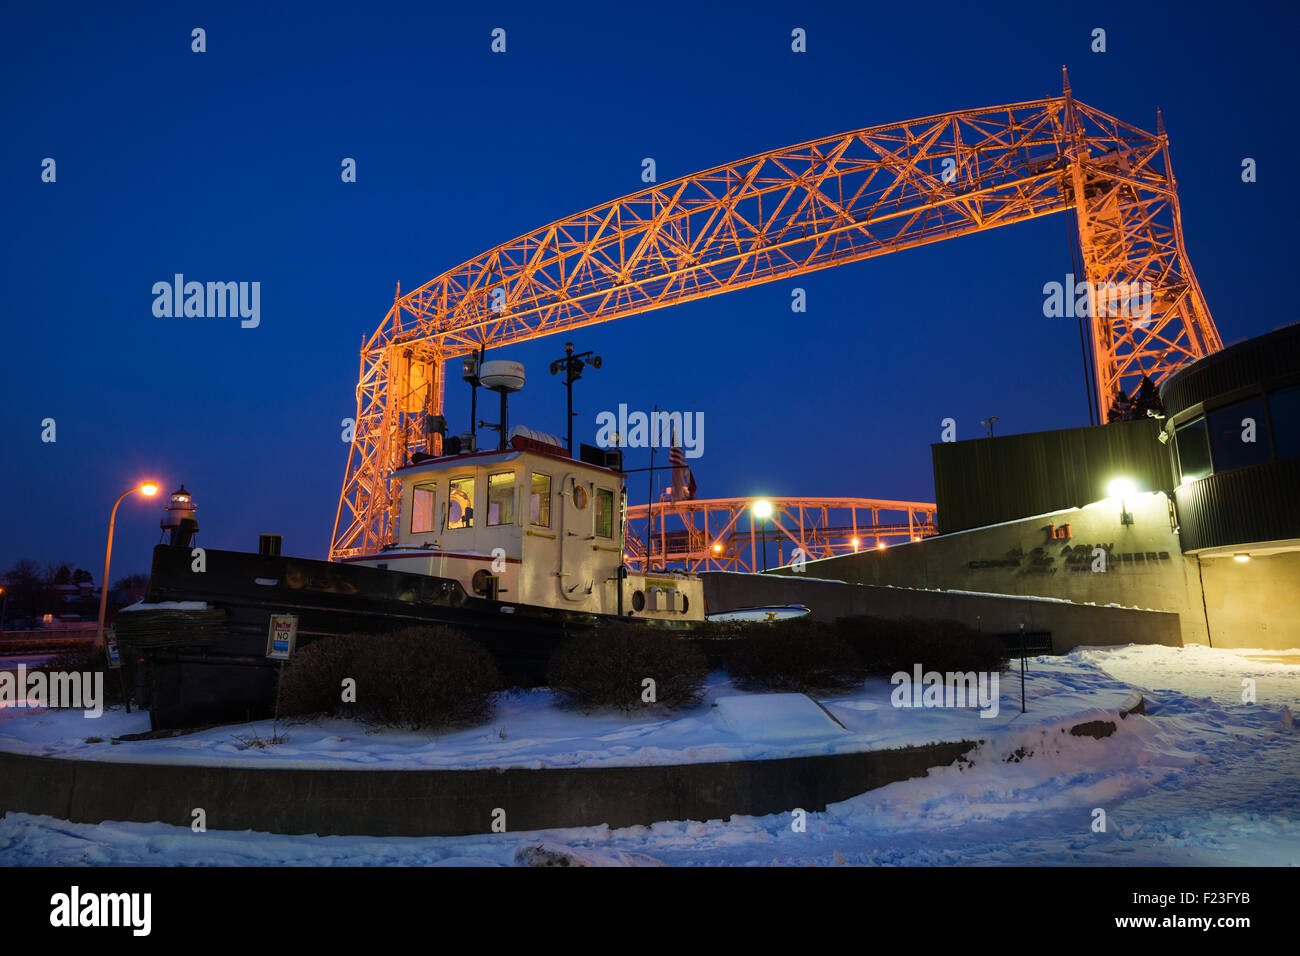 Illuminated Aerial bridge over Lake Superior with tug boat in foreground at dawn in winter, Duluth, Minnesota, USA Stock Photo